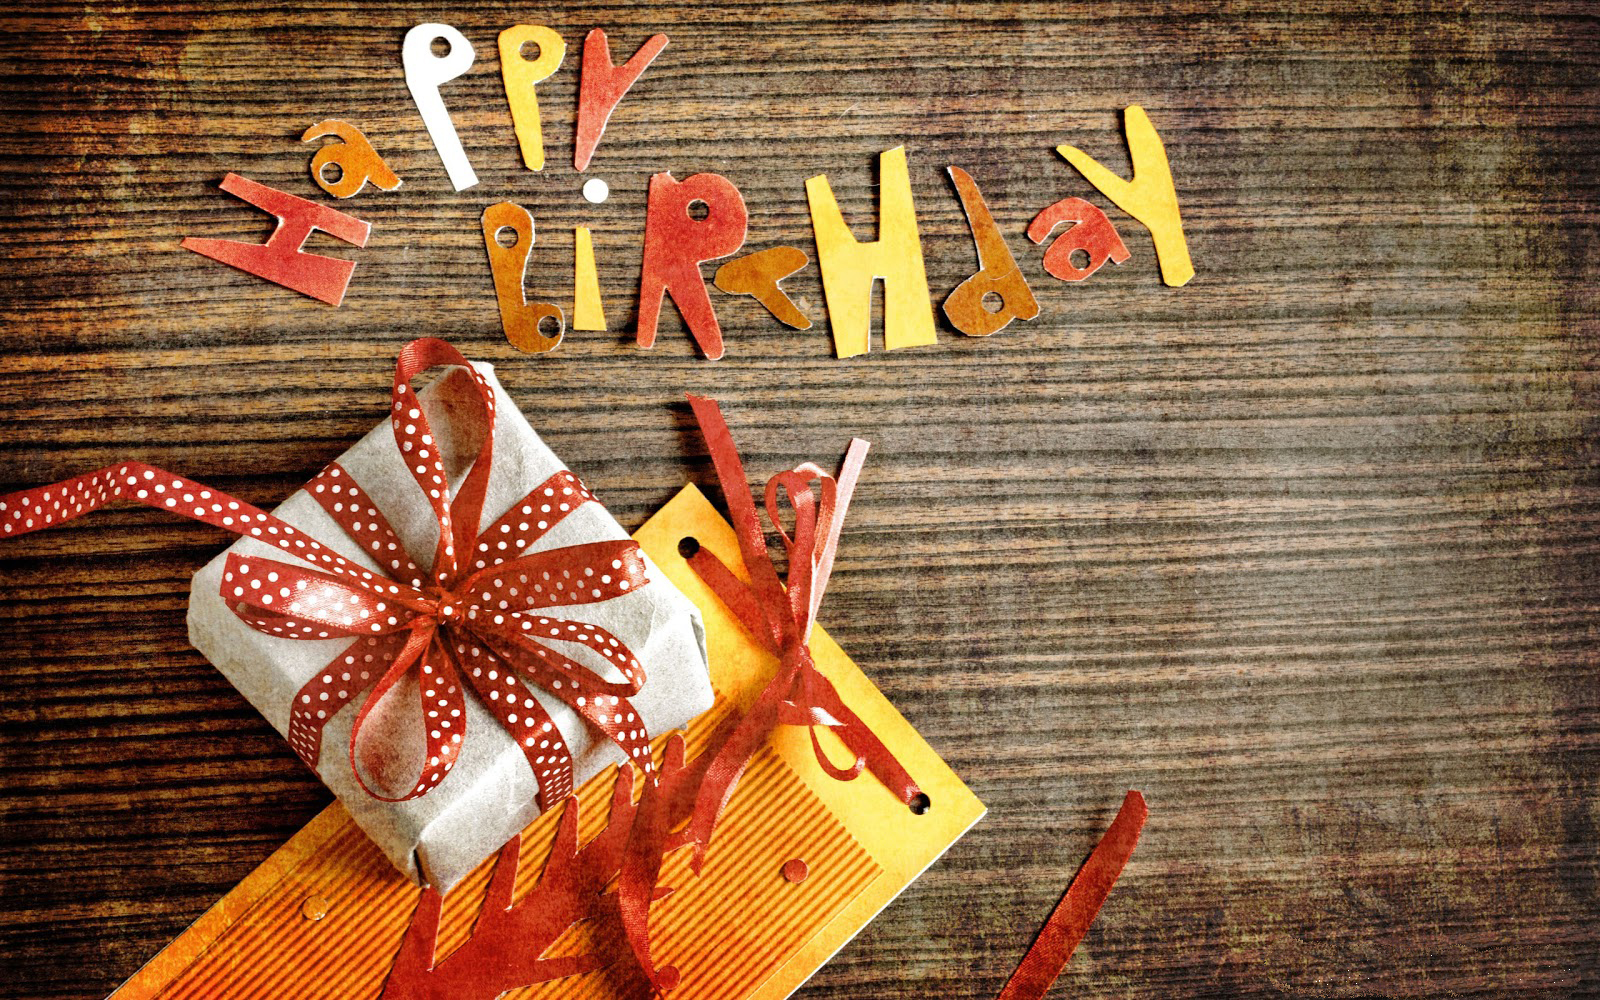 happy birthday wishes ecards free download ~ Full Hd Wall ...